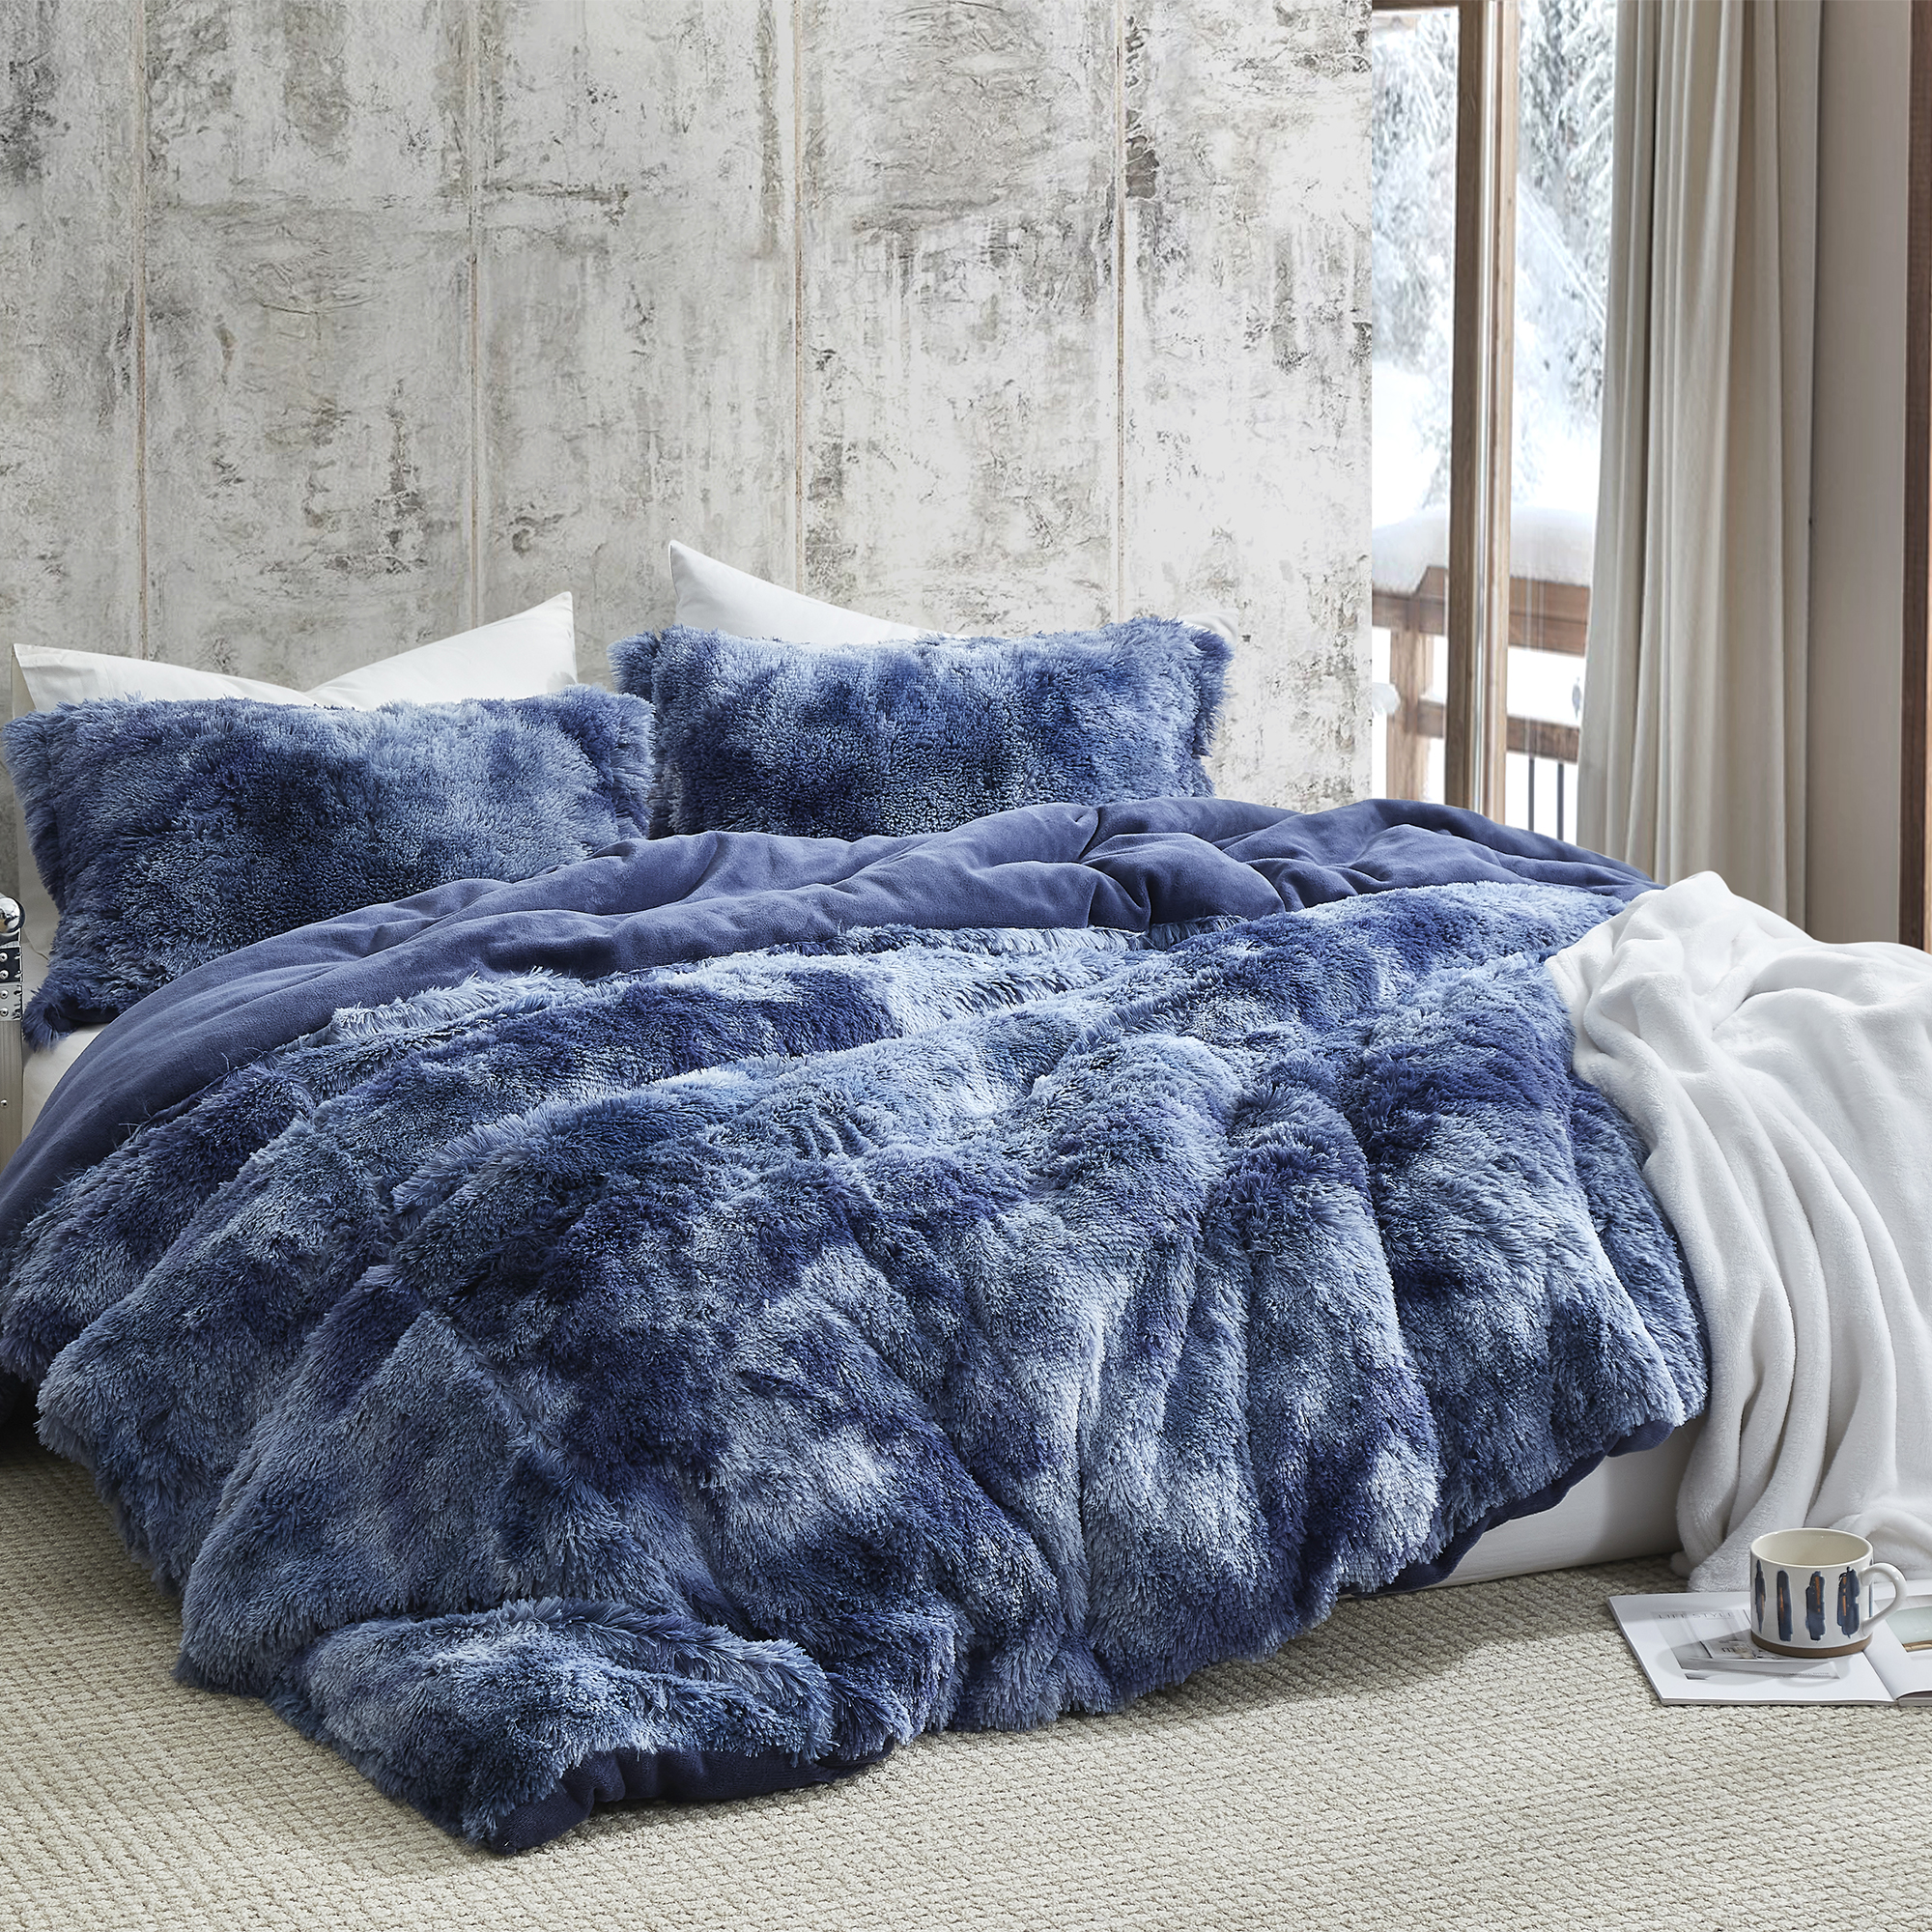 Are You Kidding - Coma Inducer® Oversized King Comforter - Periwinkle Thunderstorm